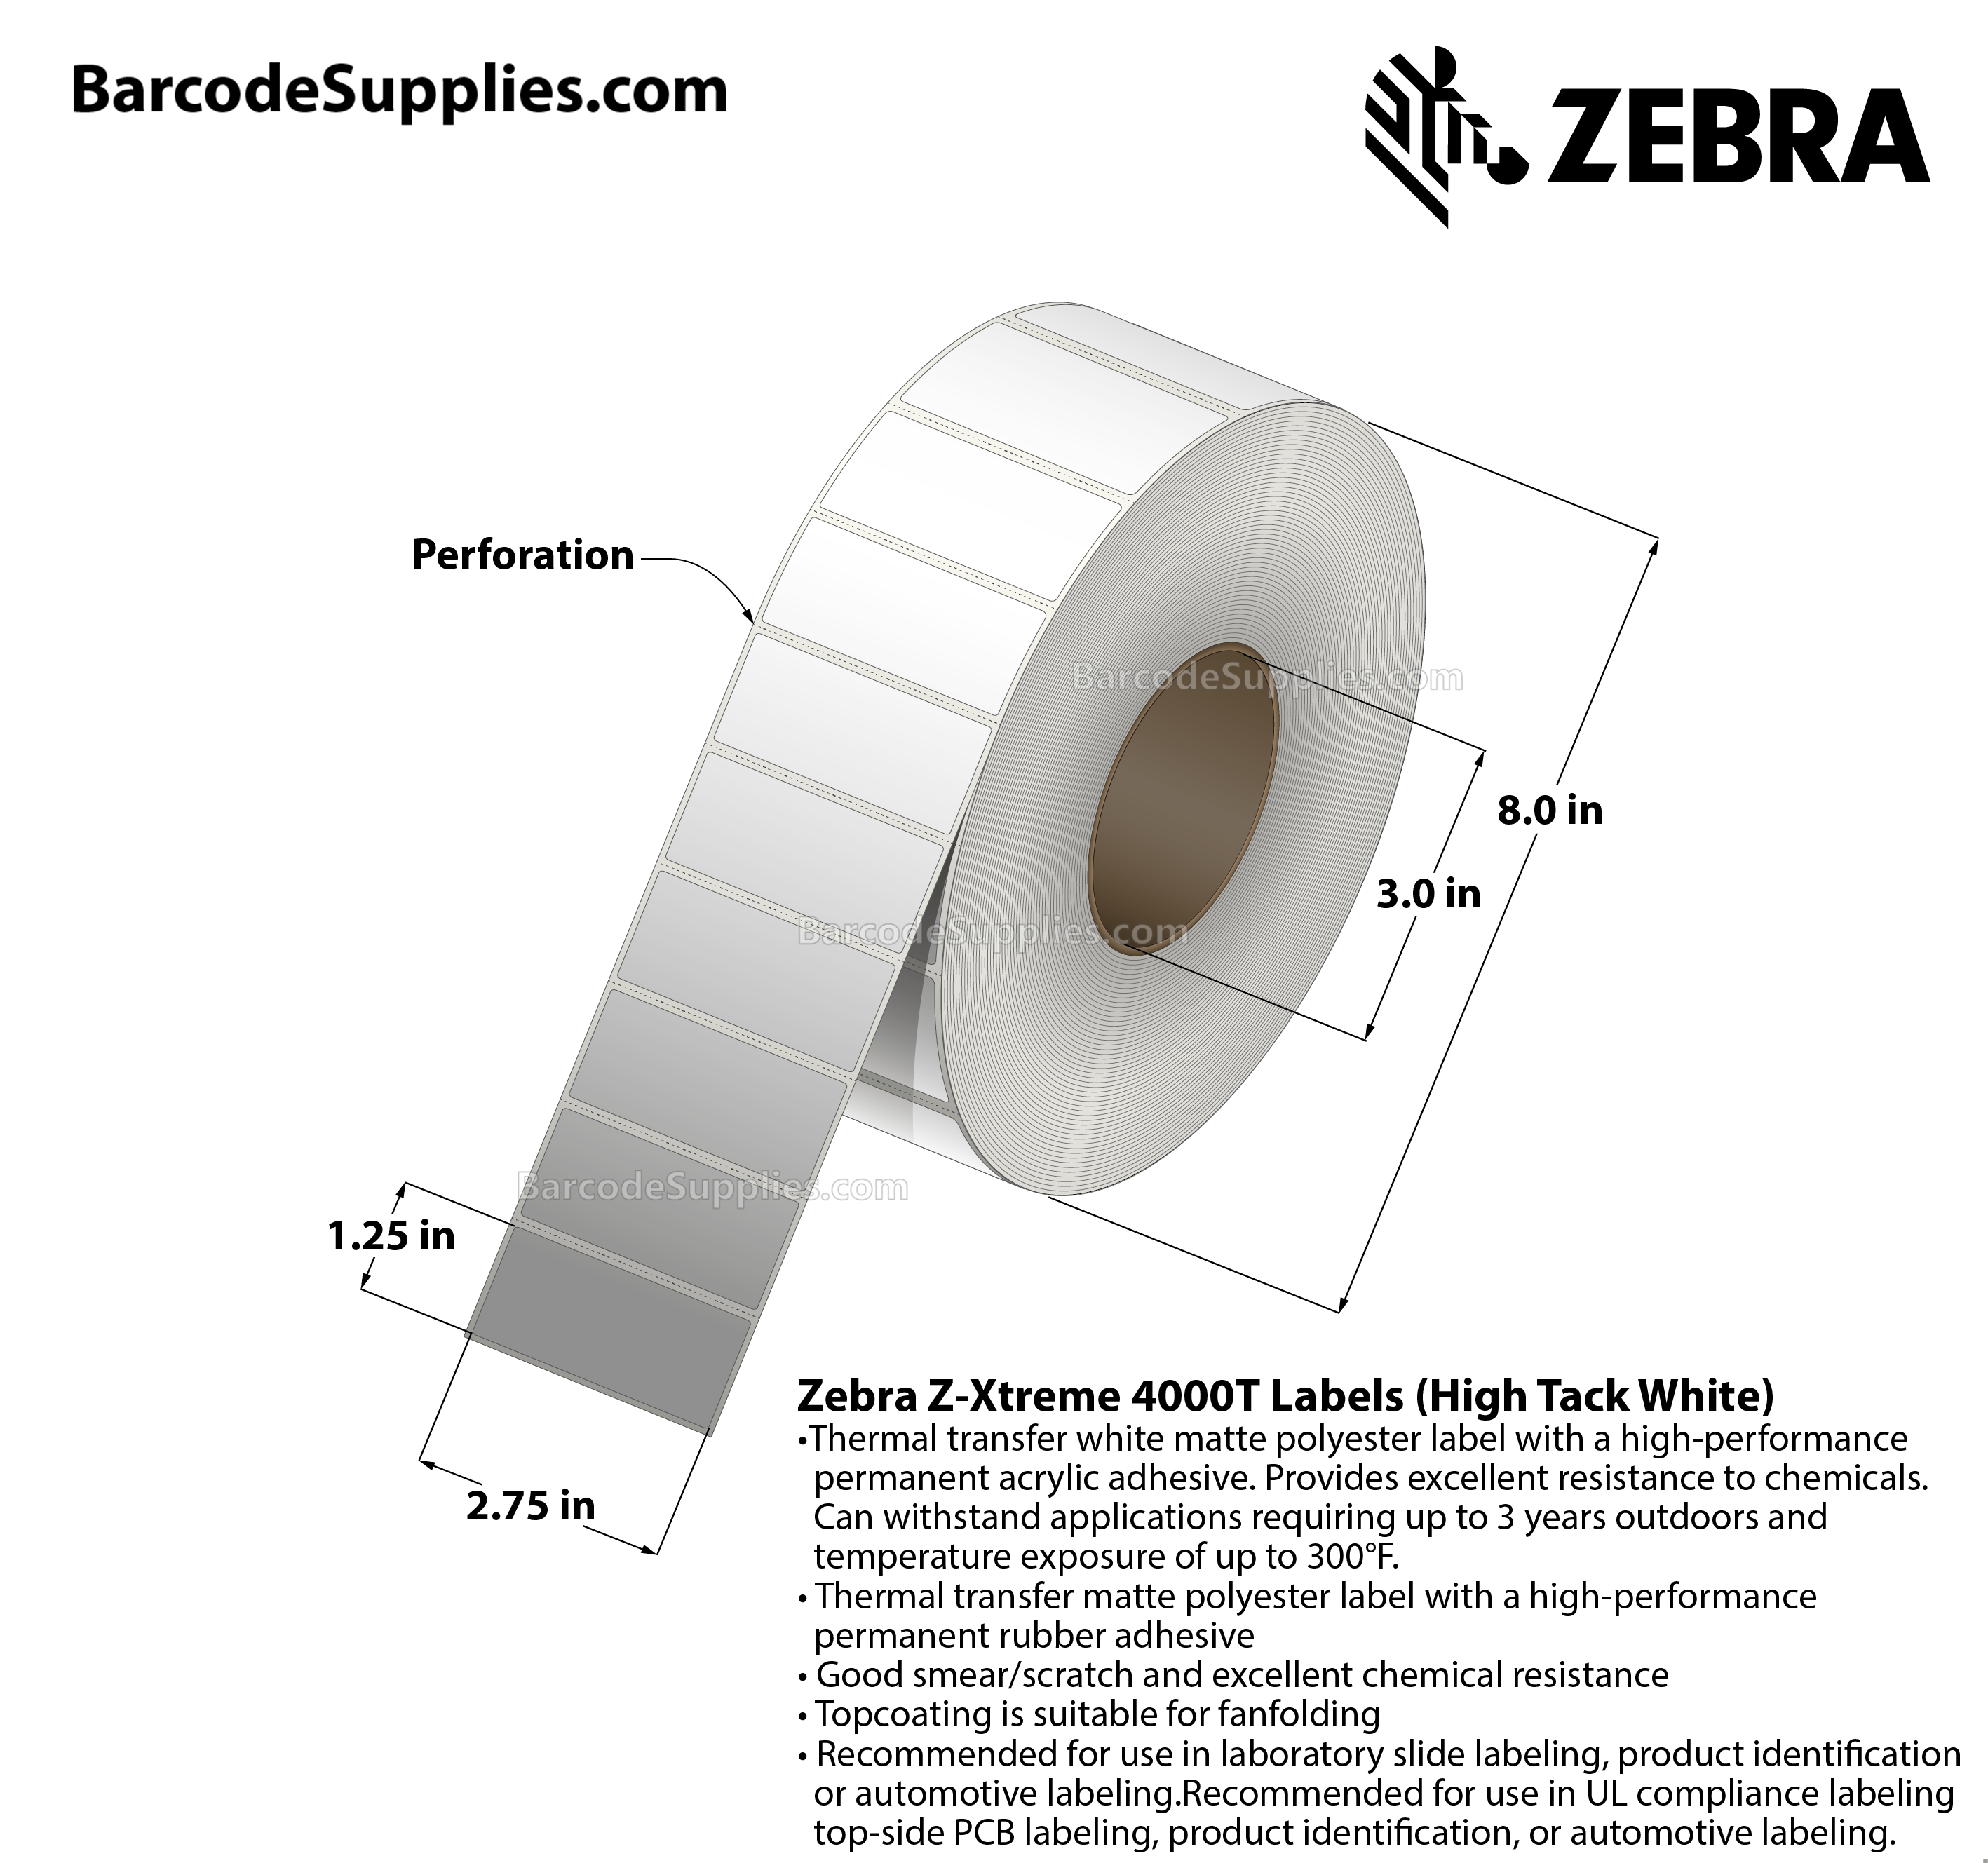 2.75 x 1.25 Thermal Transfer White Z-Xtreme 4000T High-Tack White Labels With High-tack Adhesive - Perforated - 3000 Labels Per Roll - Carton Of 1 Rolls - 3000 Labels Total - MPN: 10023228